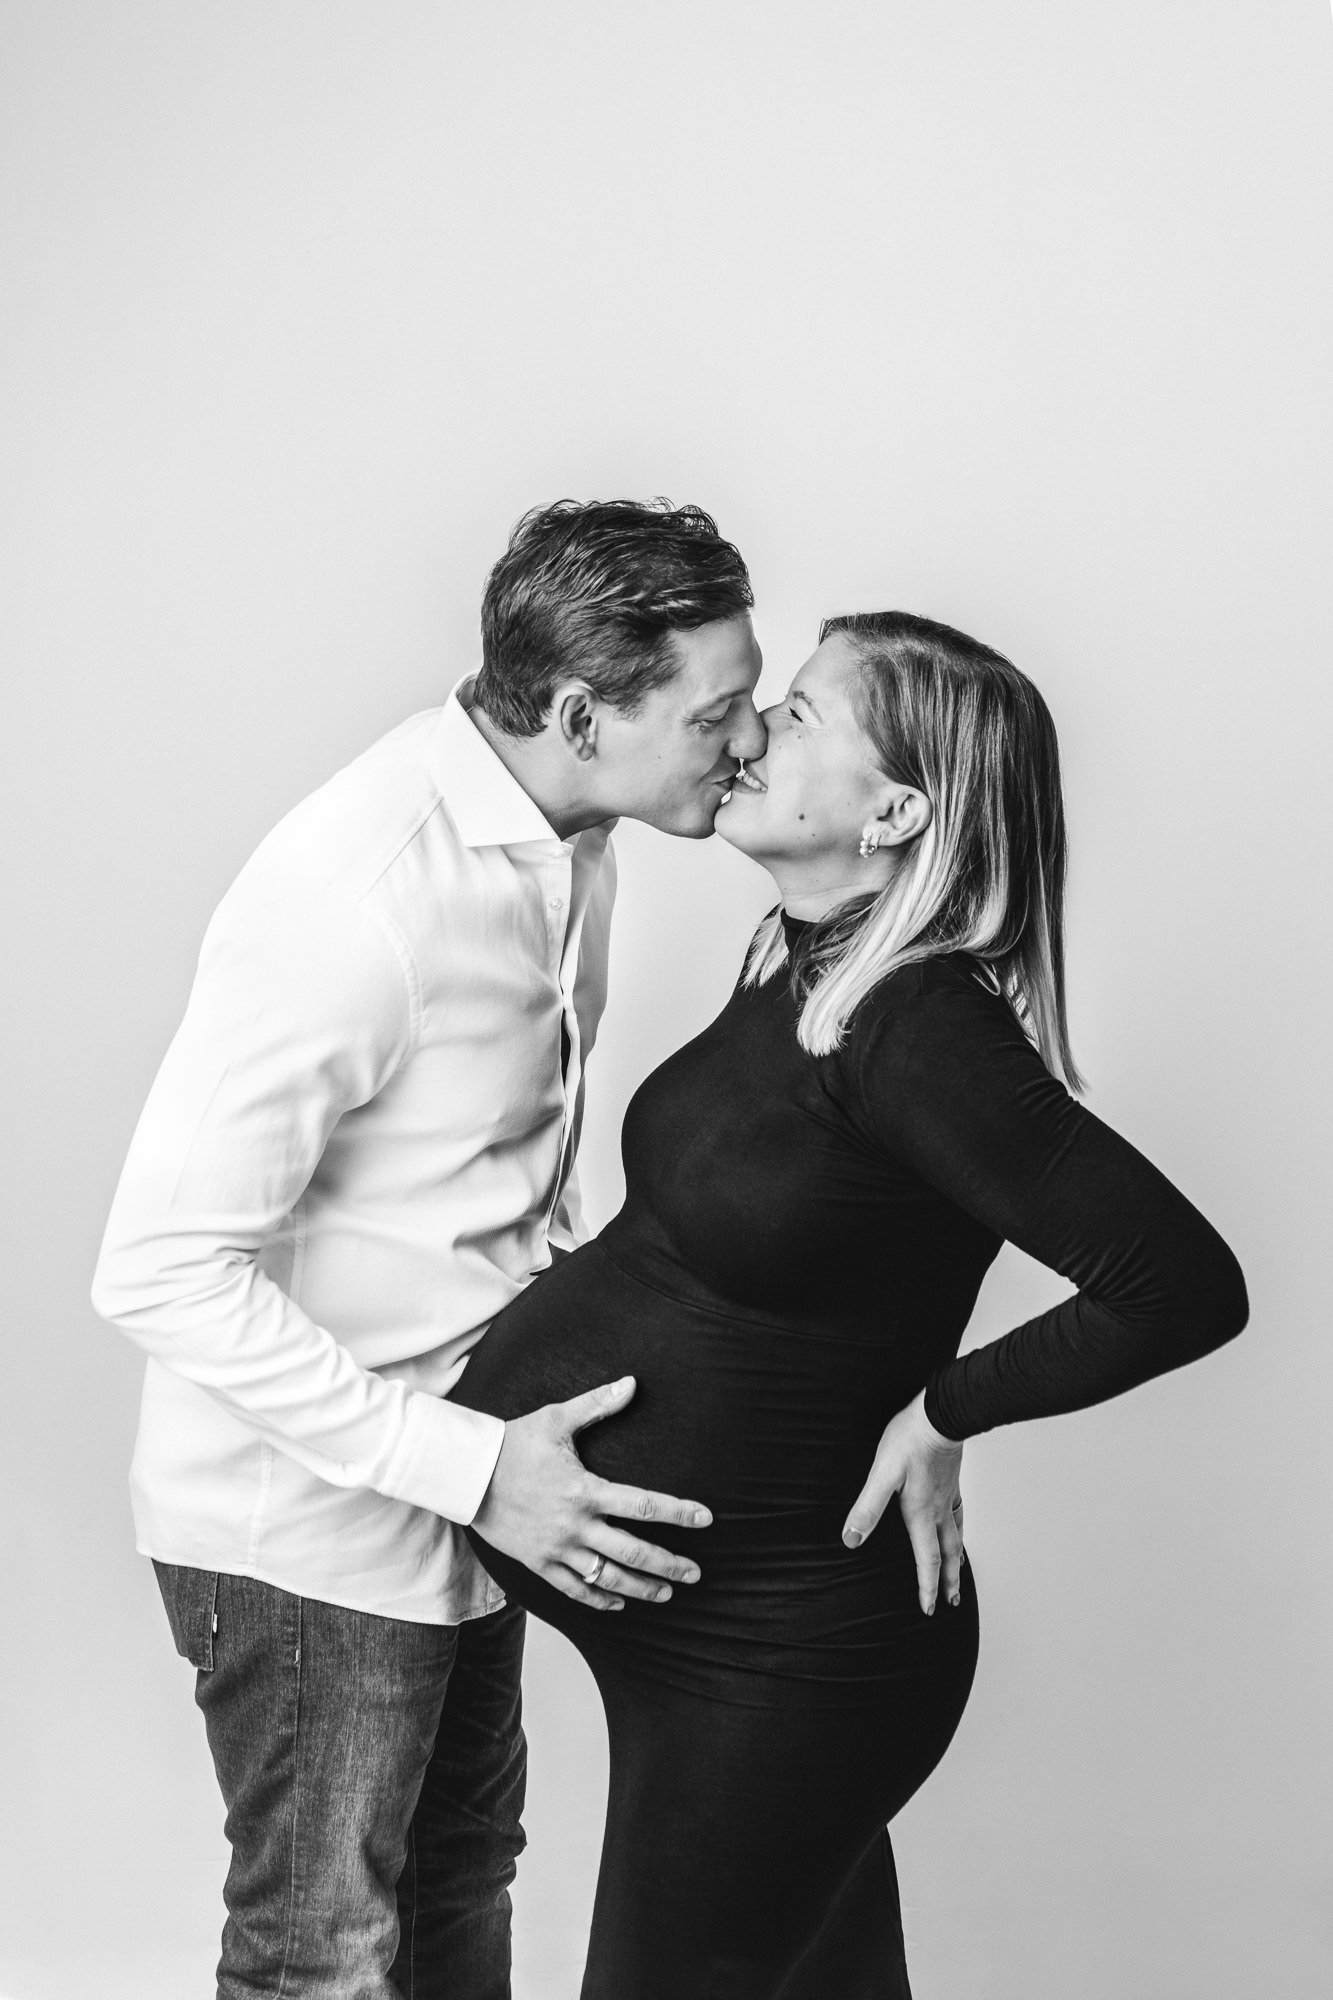  A husband holds his wife's baby bump while giving her a big kiss by Nicole Hawkins Photography. parents to be portrait studio maternity photography black maternity dress #NicoleHawkinsPhotography #NicoleHawkinsMaternity #MaternityStudioPortraits #Fa